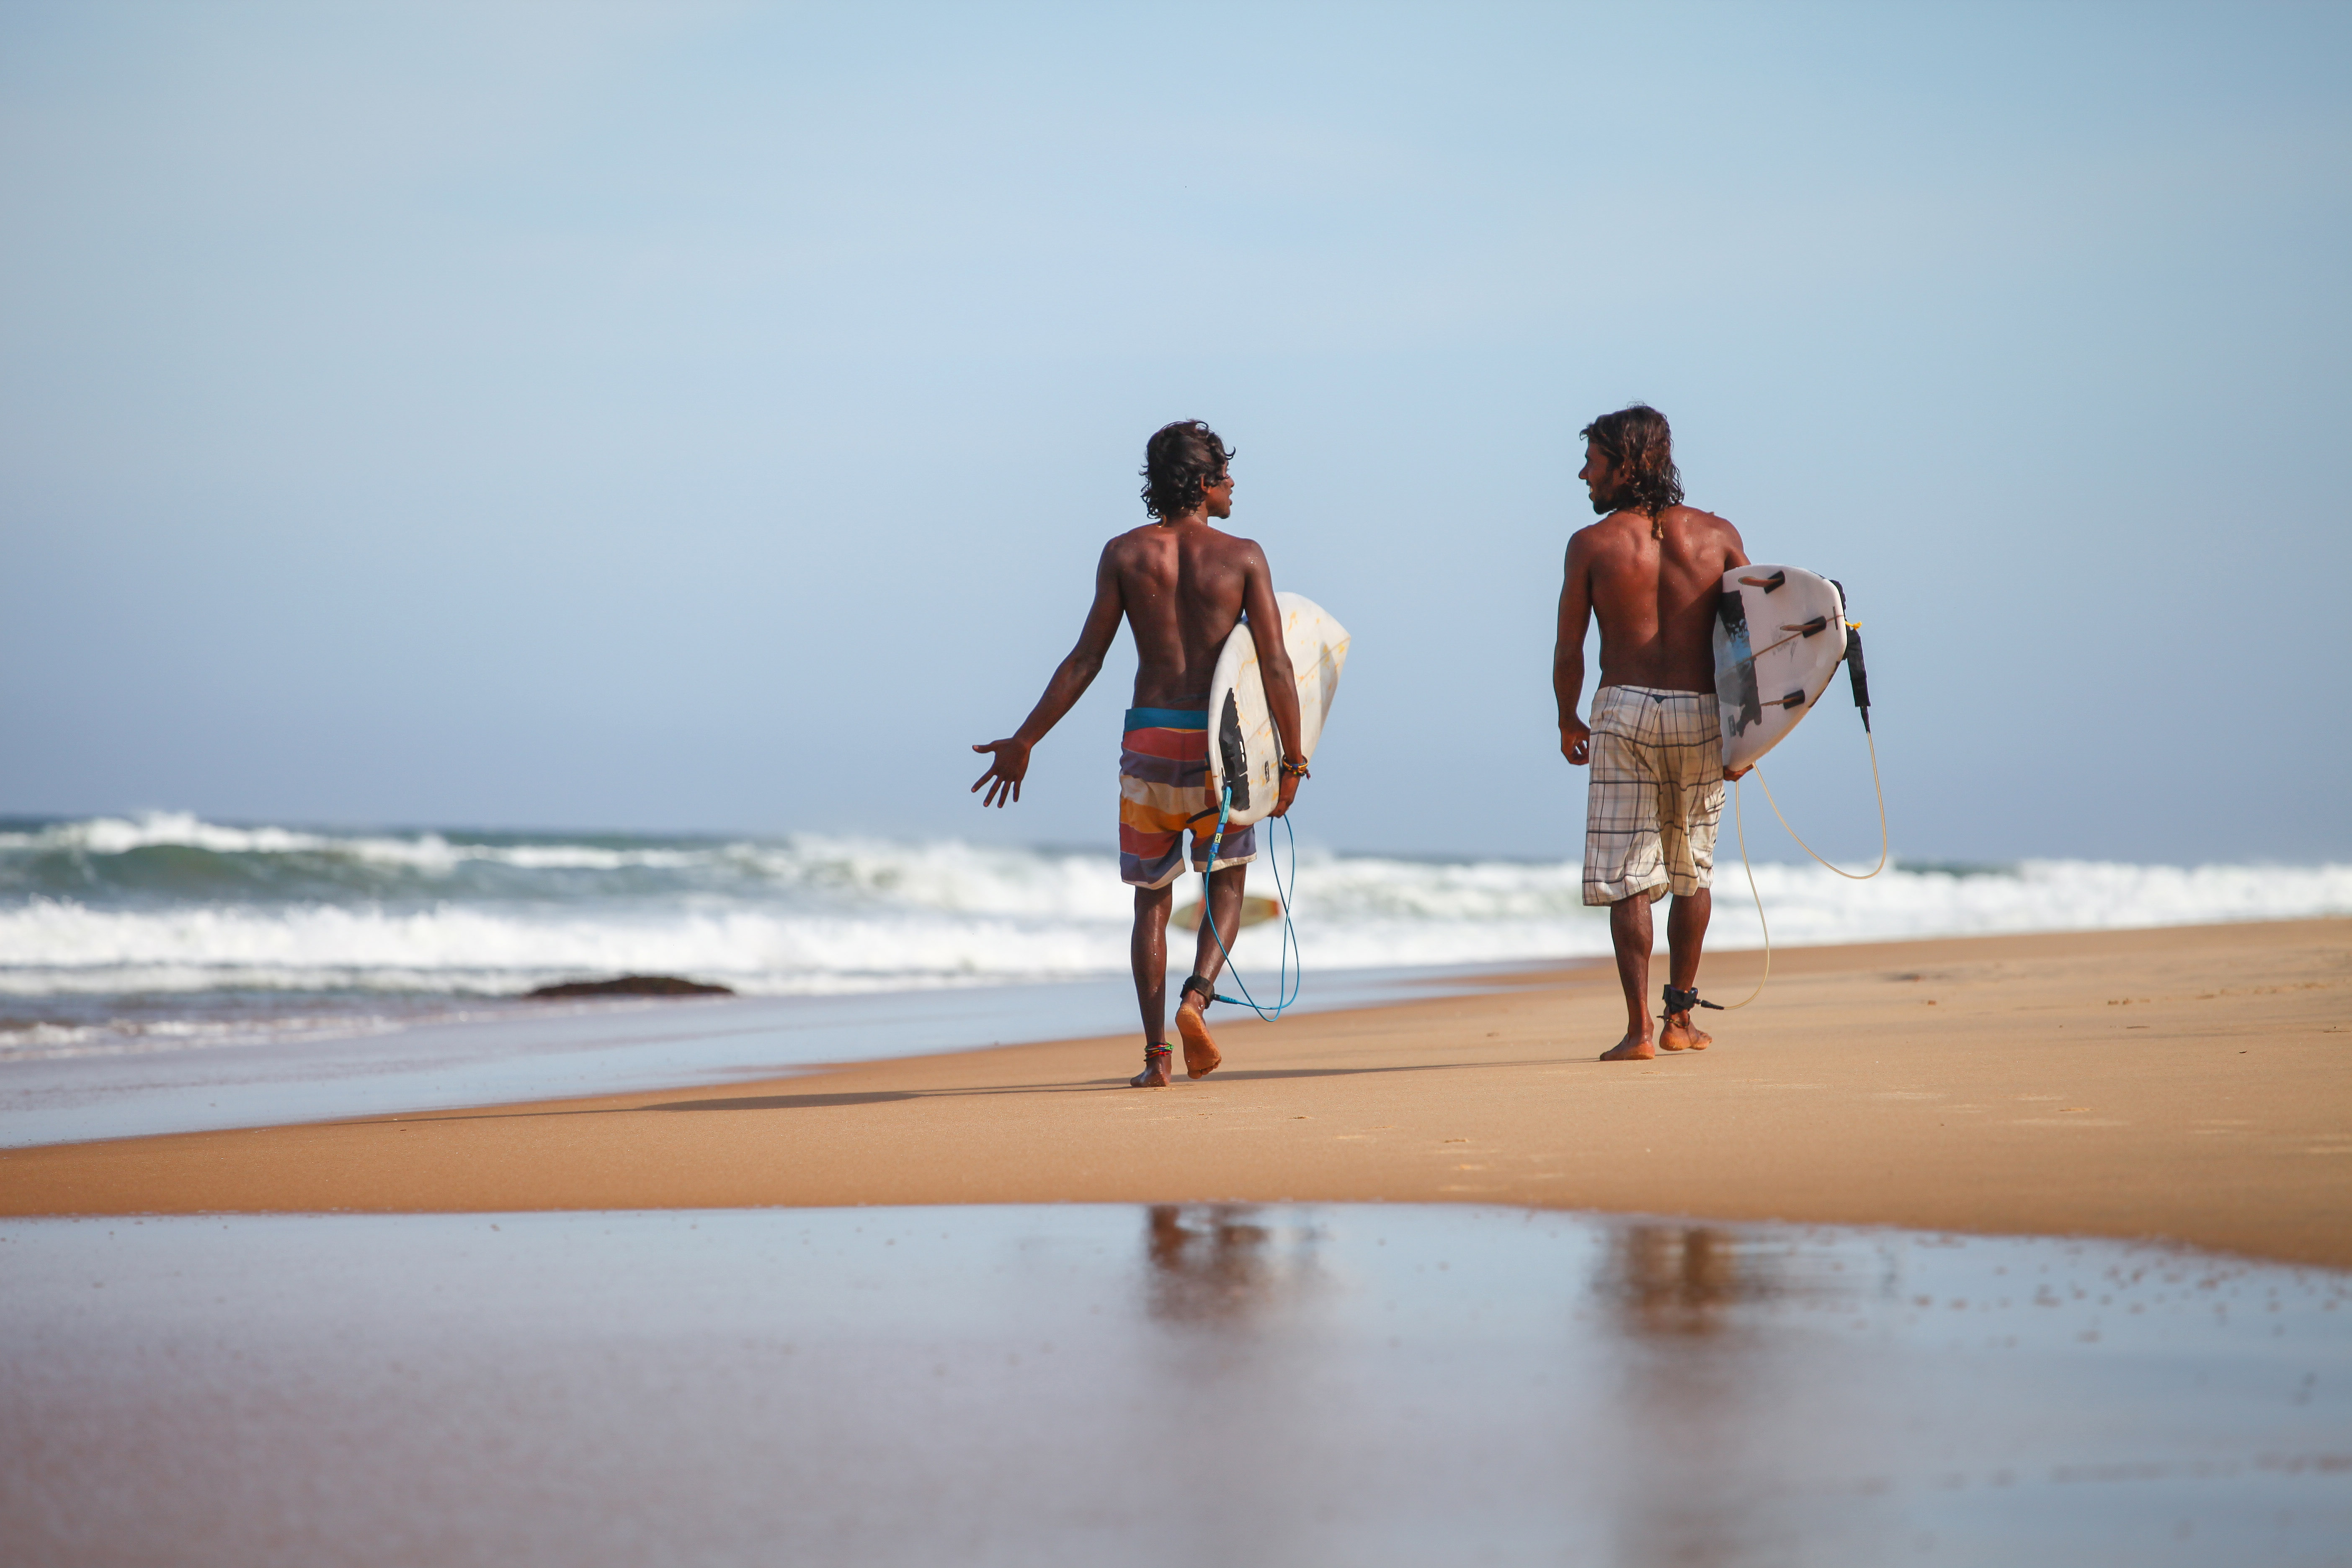 Two local surfers in Arugam Bay on the search for the perfect swell. Photo: Charlie Malmqvist.